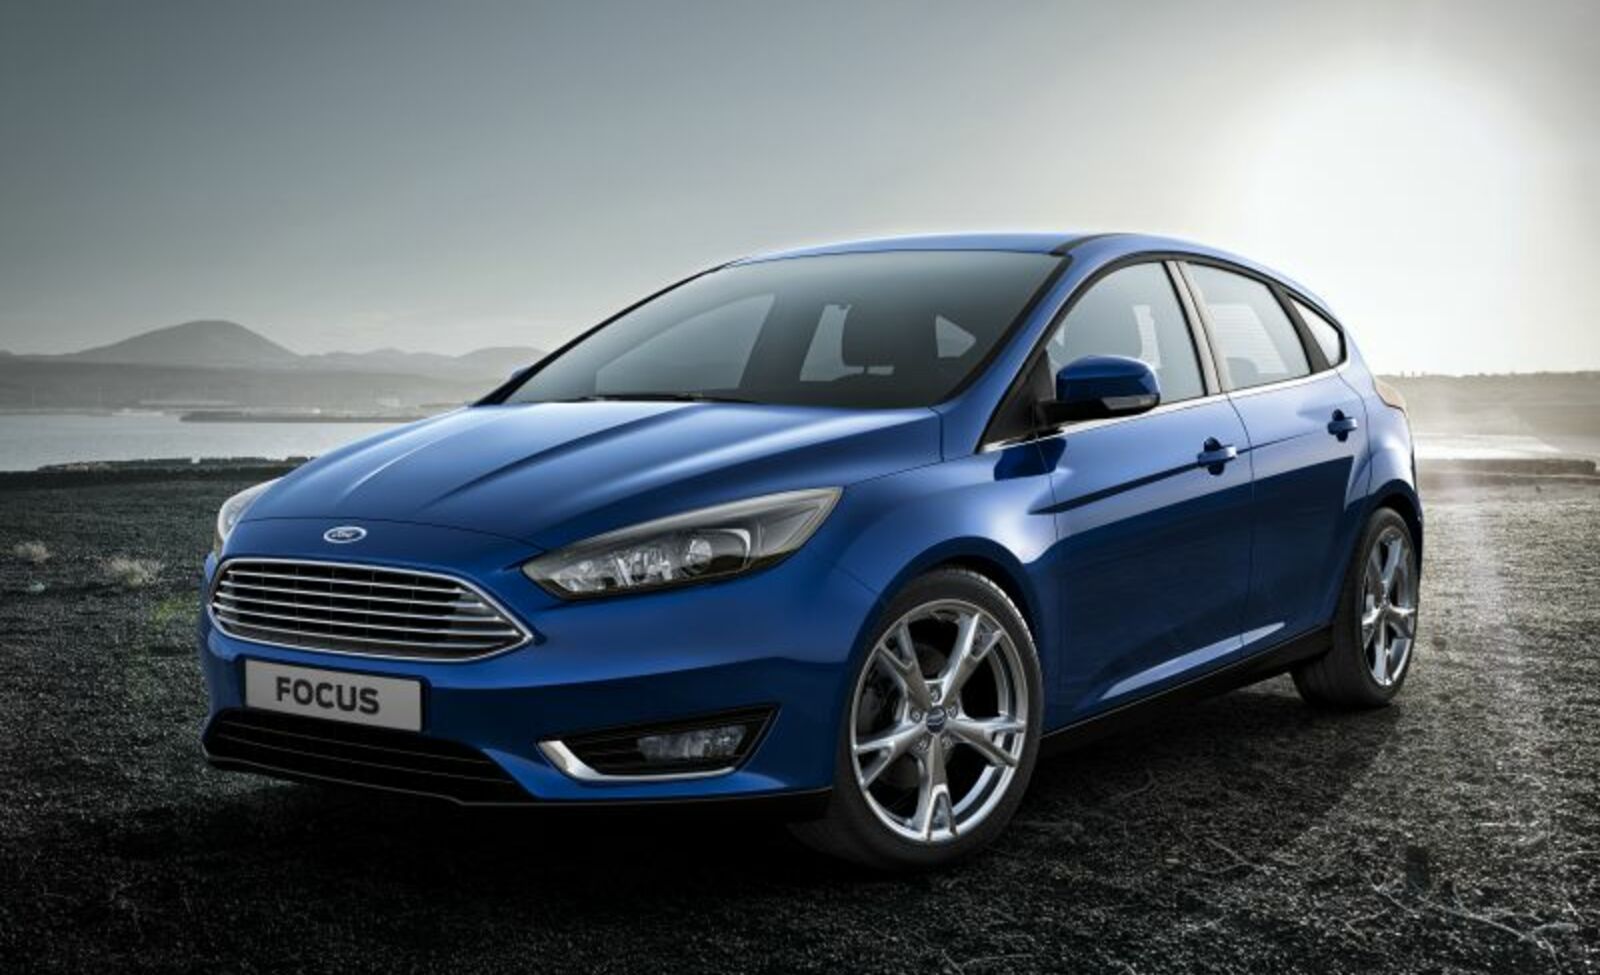 Ford Focus III Hatchback (facelift 2014) 33.5 kWh (146 Hp) Electric 2017, 2018